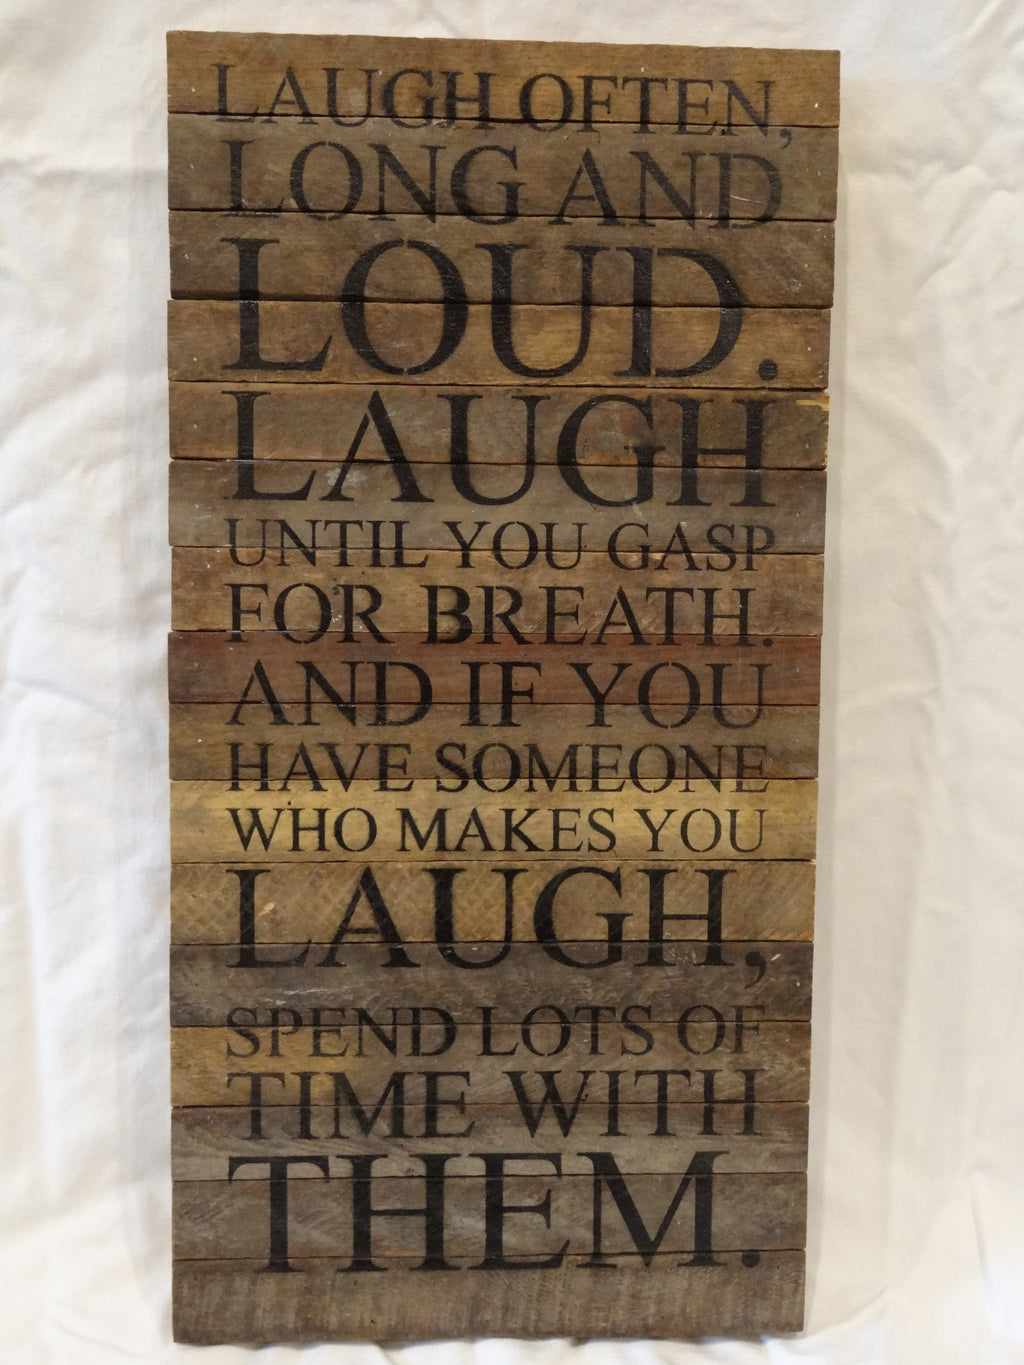 laugh often, long and loud